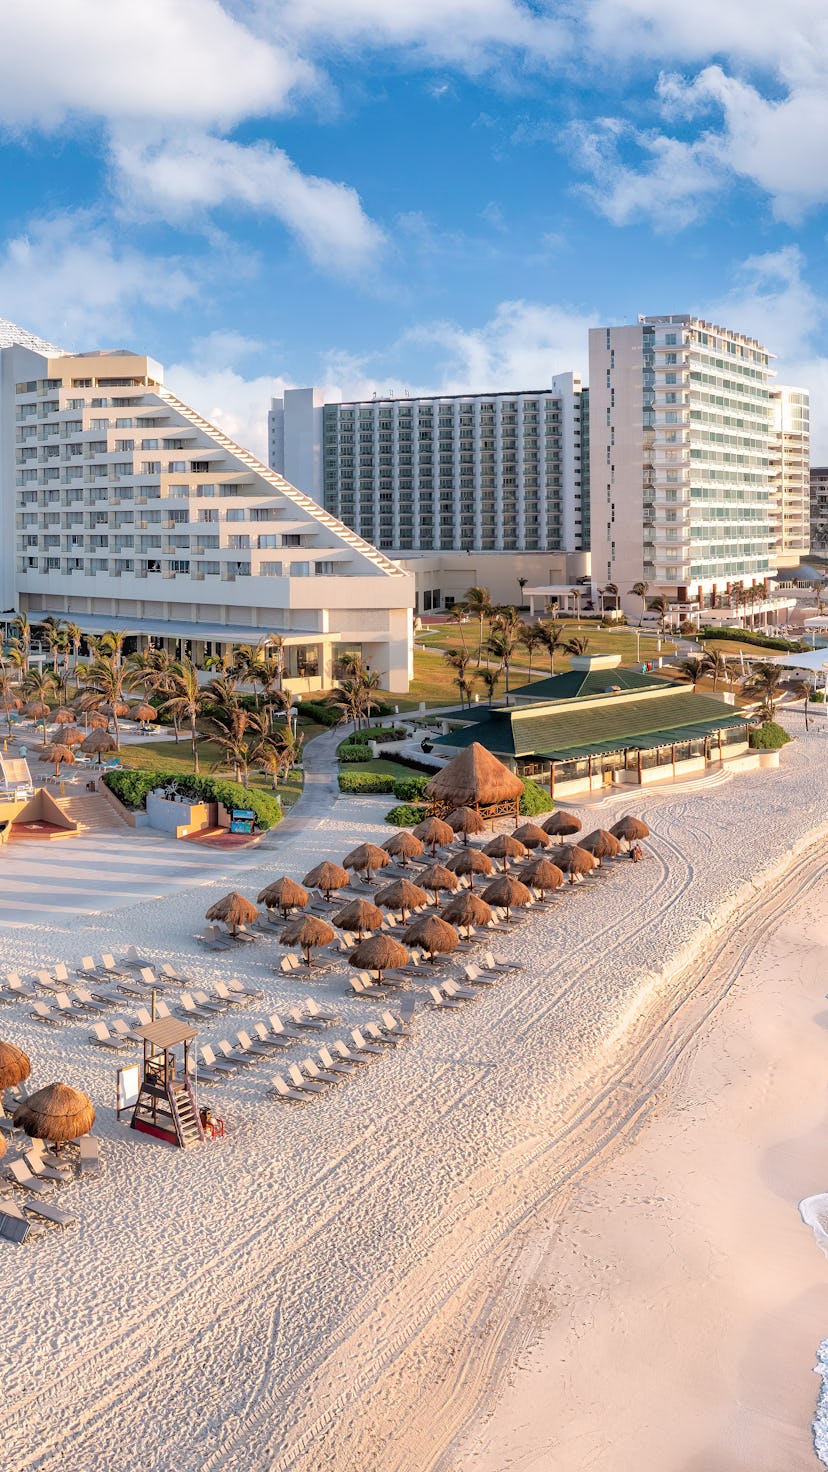 Pioneering Aries will love visiting this Cancun all-inclusive resort. 